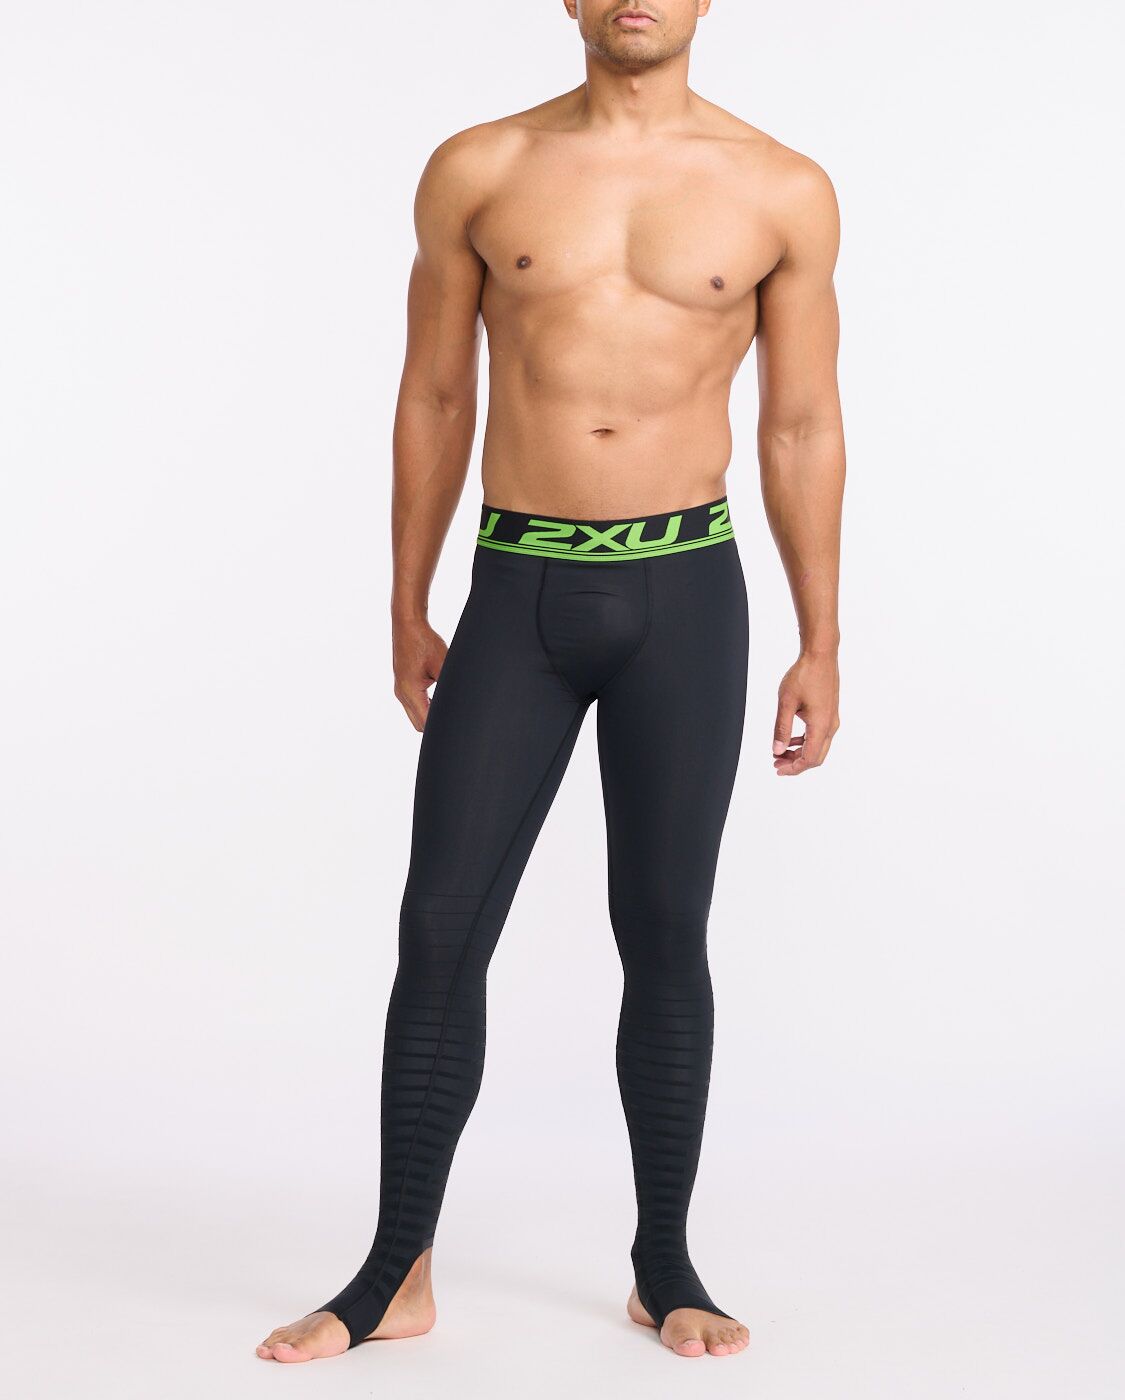  2XU Men's Elite Power Recovery Compression Tights, Black/Nero,  X-Large/Tall : Clothing, Shoes & Jewelry